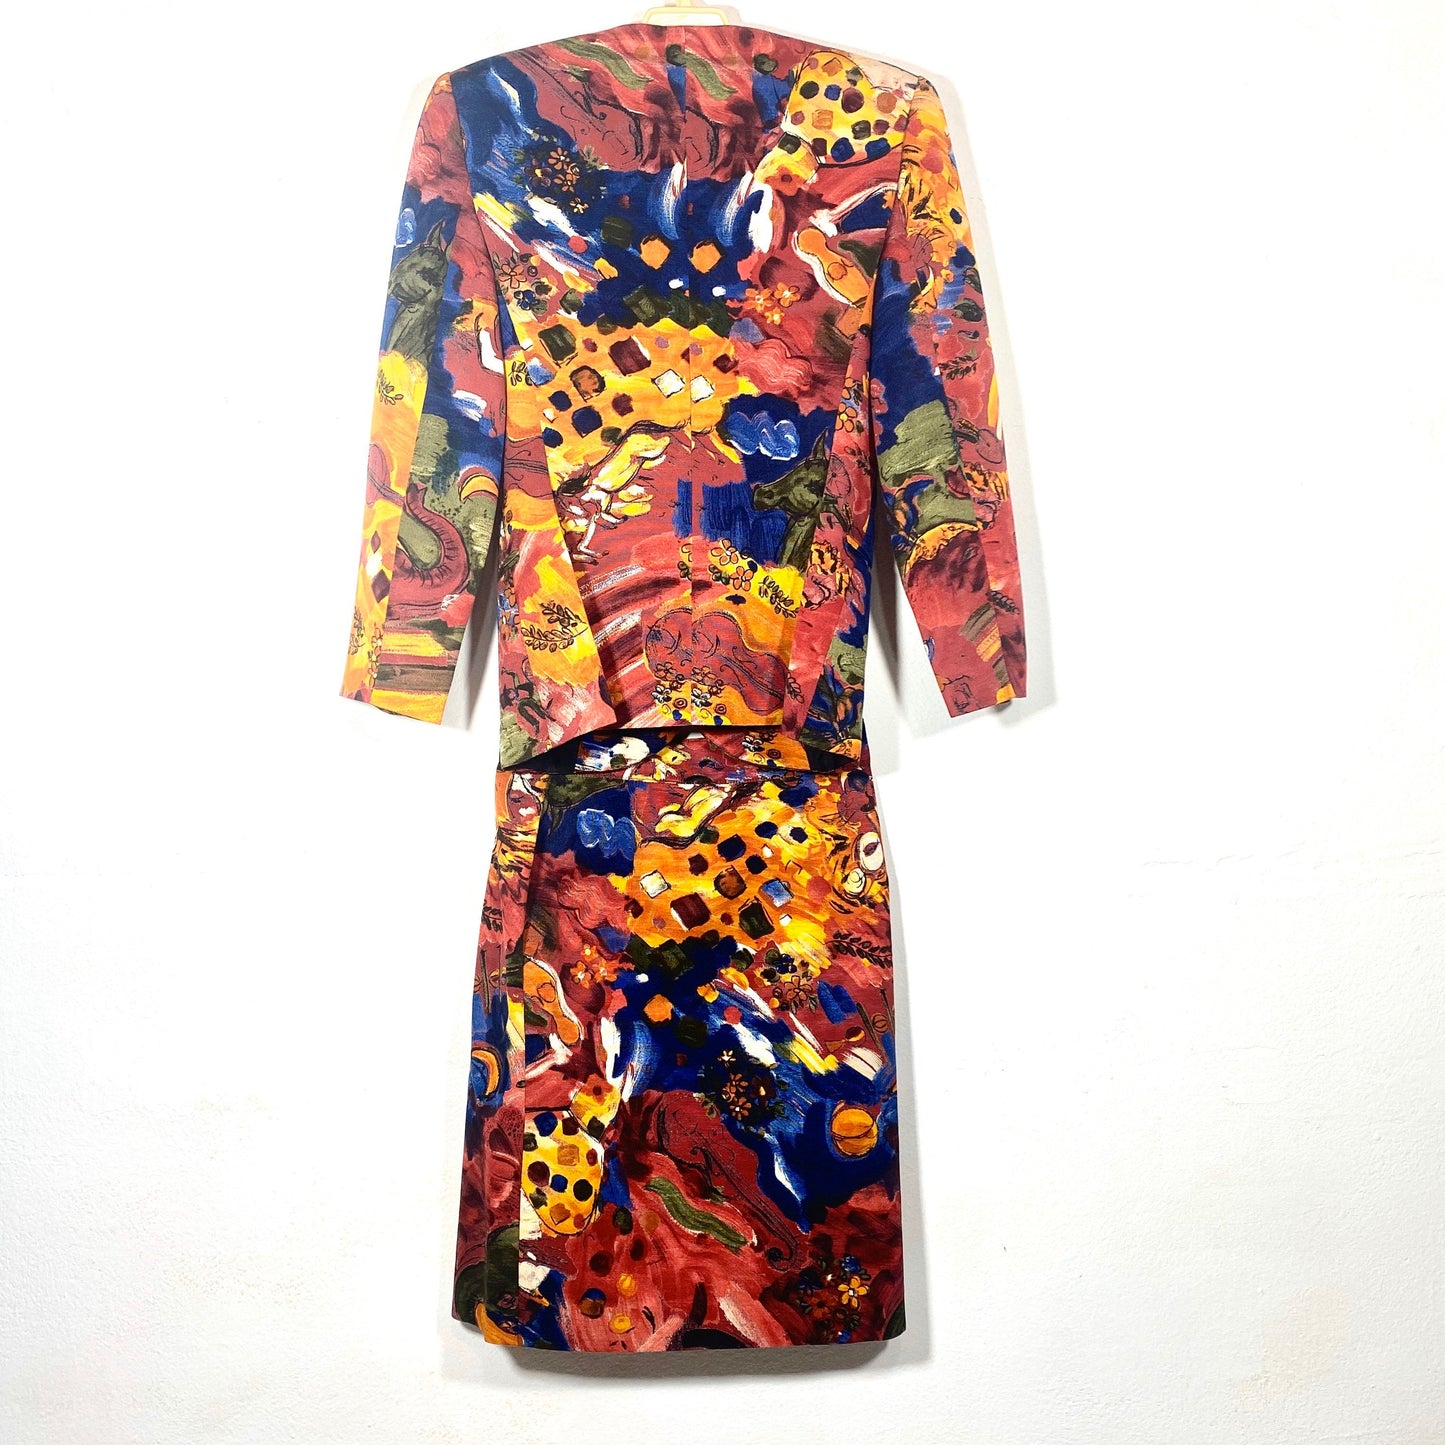 Iceberg 1980s colorful tailleur suit, Chanel style blazer & skirt wirh Incredible print and tigers embroidery